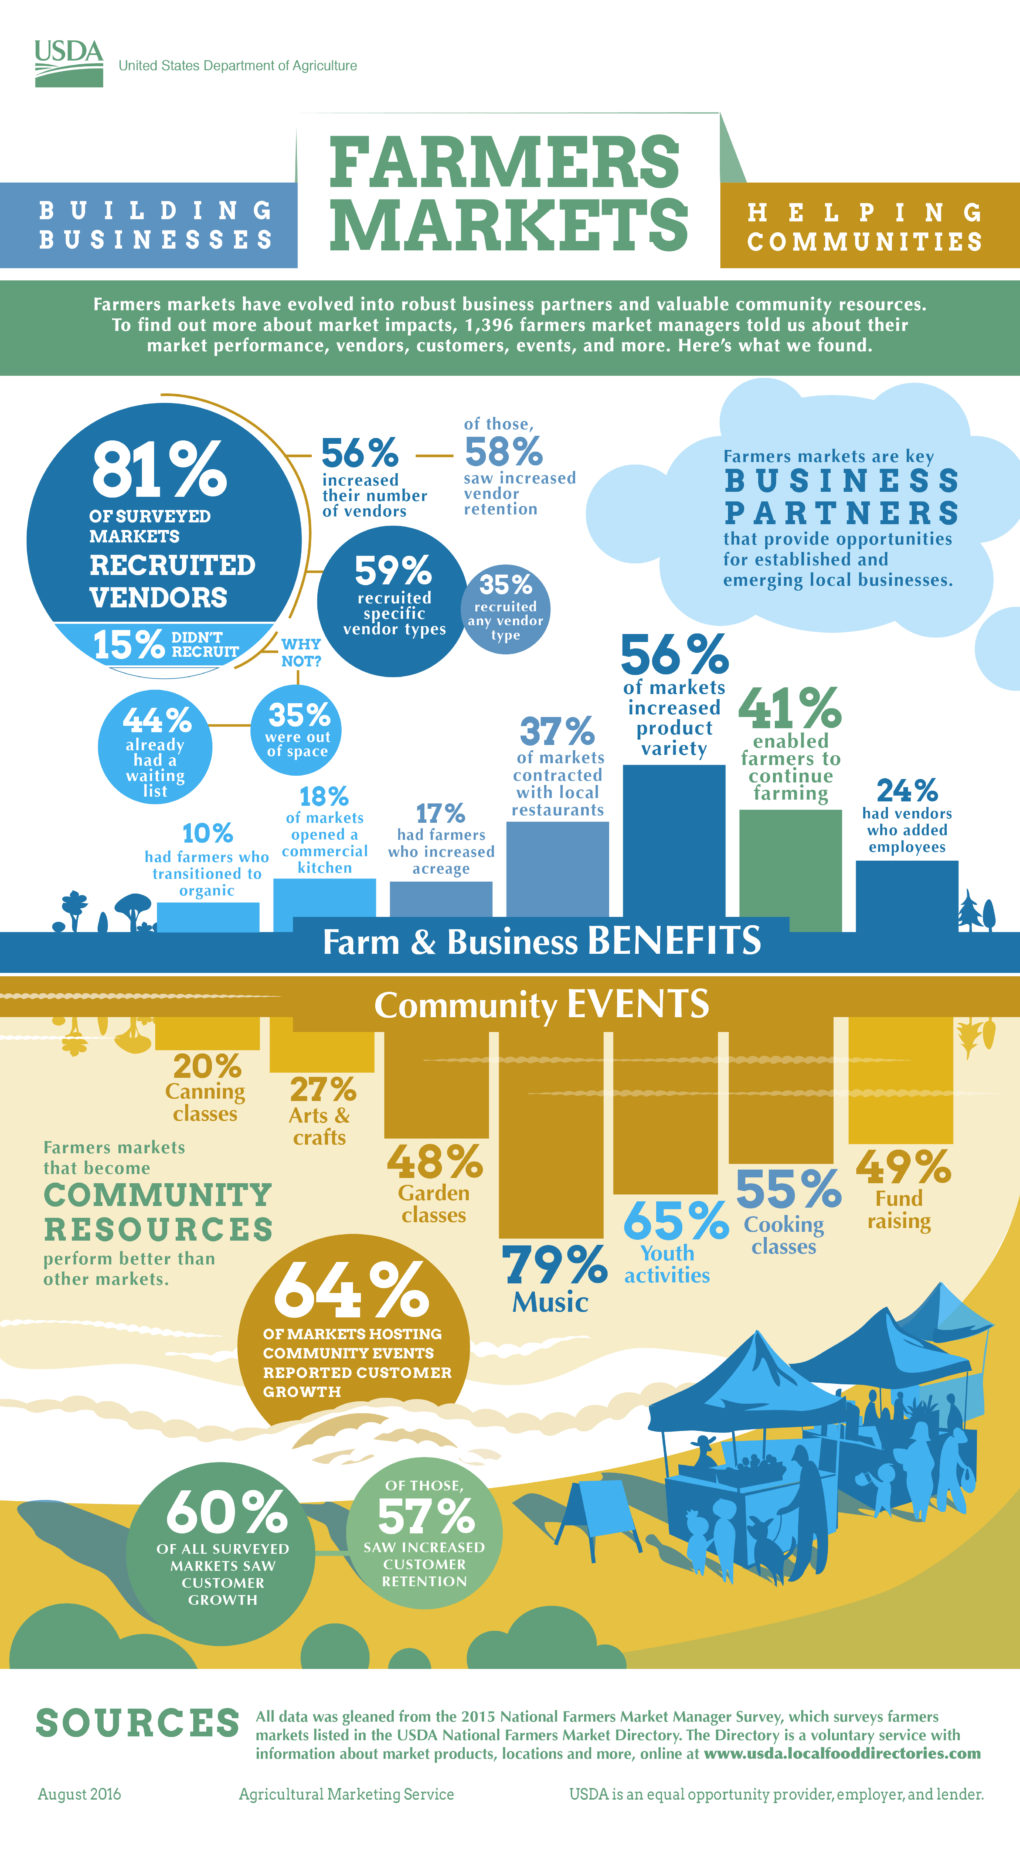 farmers-markets-building-businesses-helping-communities